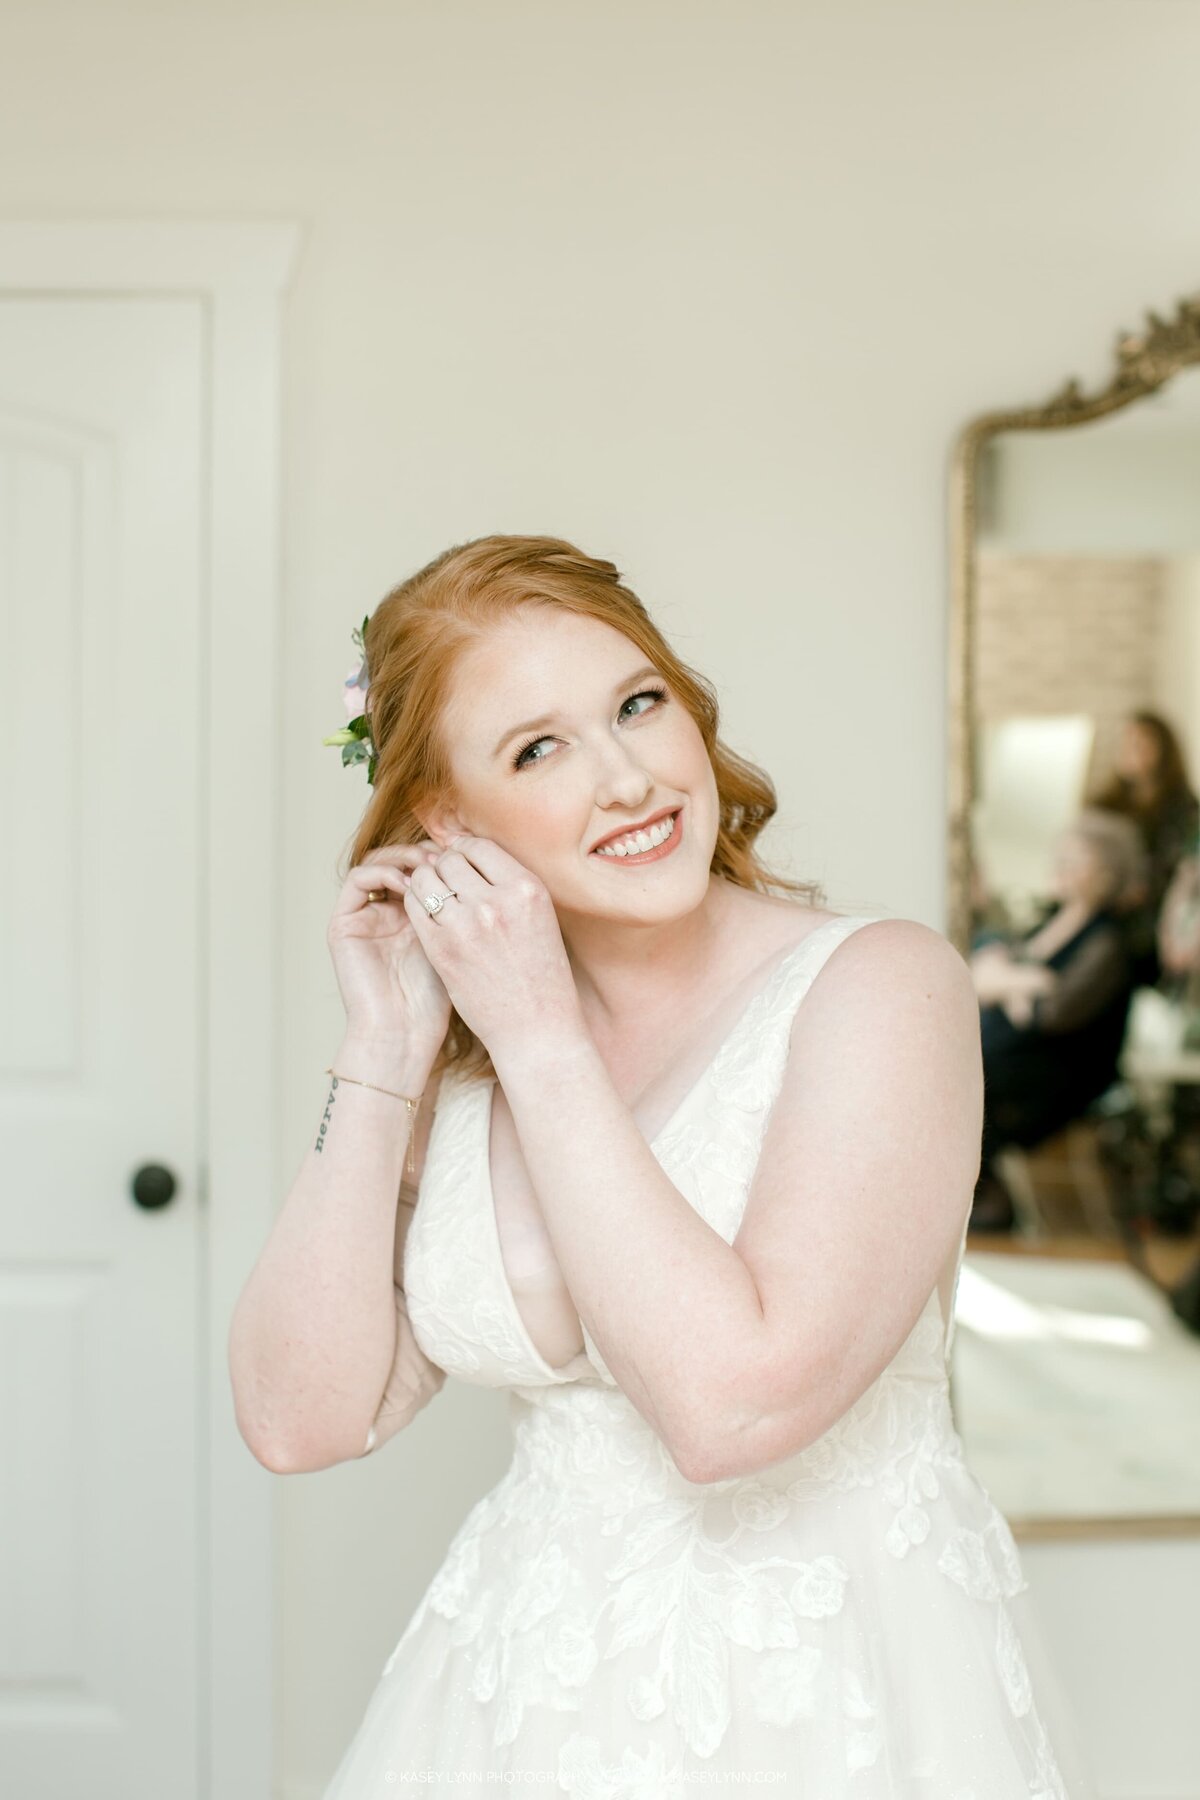 Lilly Bridal Artistry - Wedding Hair and Makeup Artist - in Spring Texas